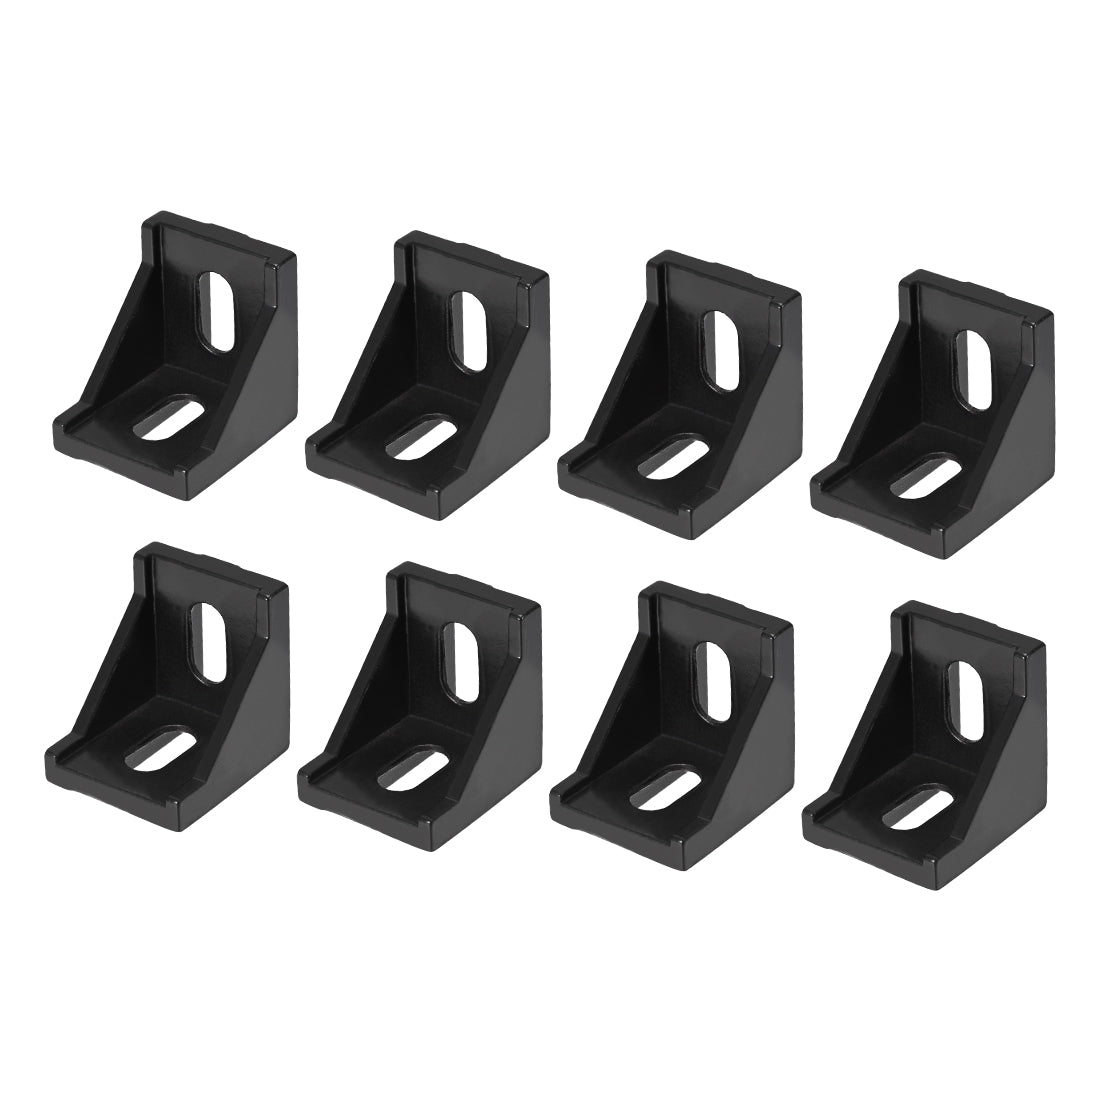 uxcell Uxcell Inside Corner Bracket Gusset, 40mm x 40mm for 4040 Series Aluminum Extrusion Profile with Slot 8mm, 8 Pcs (Black)